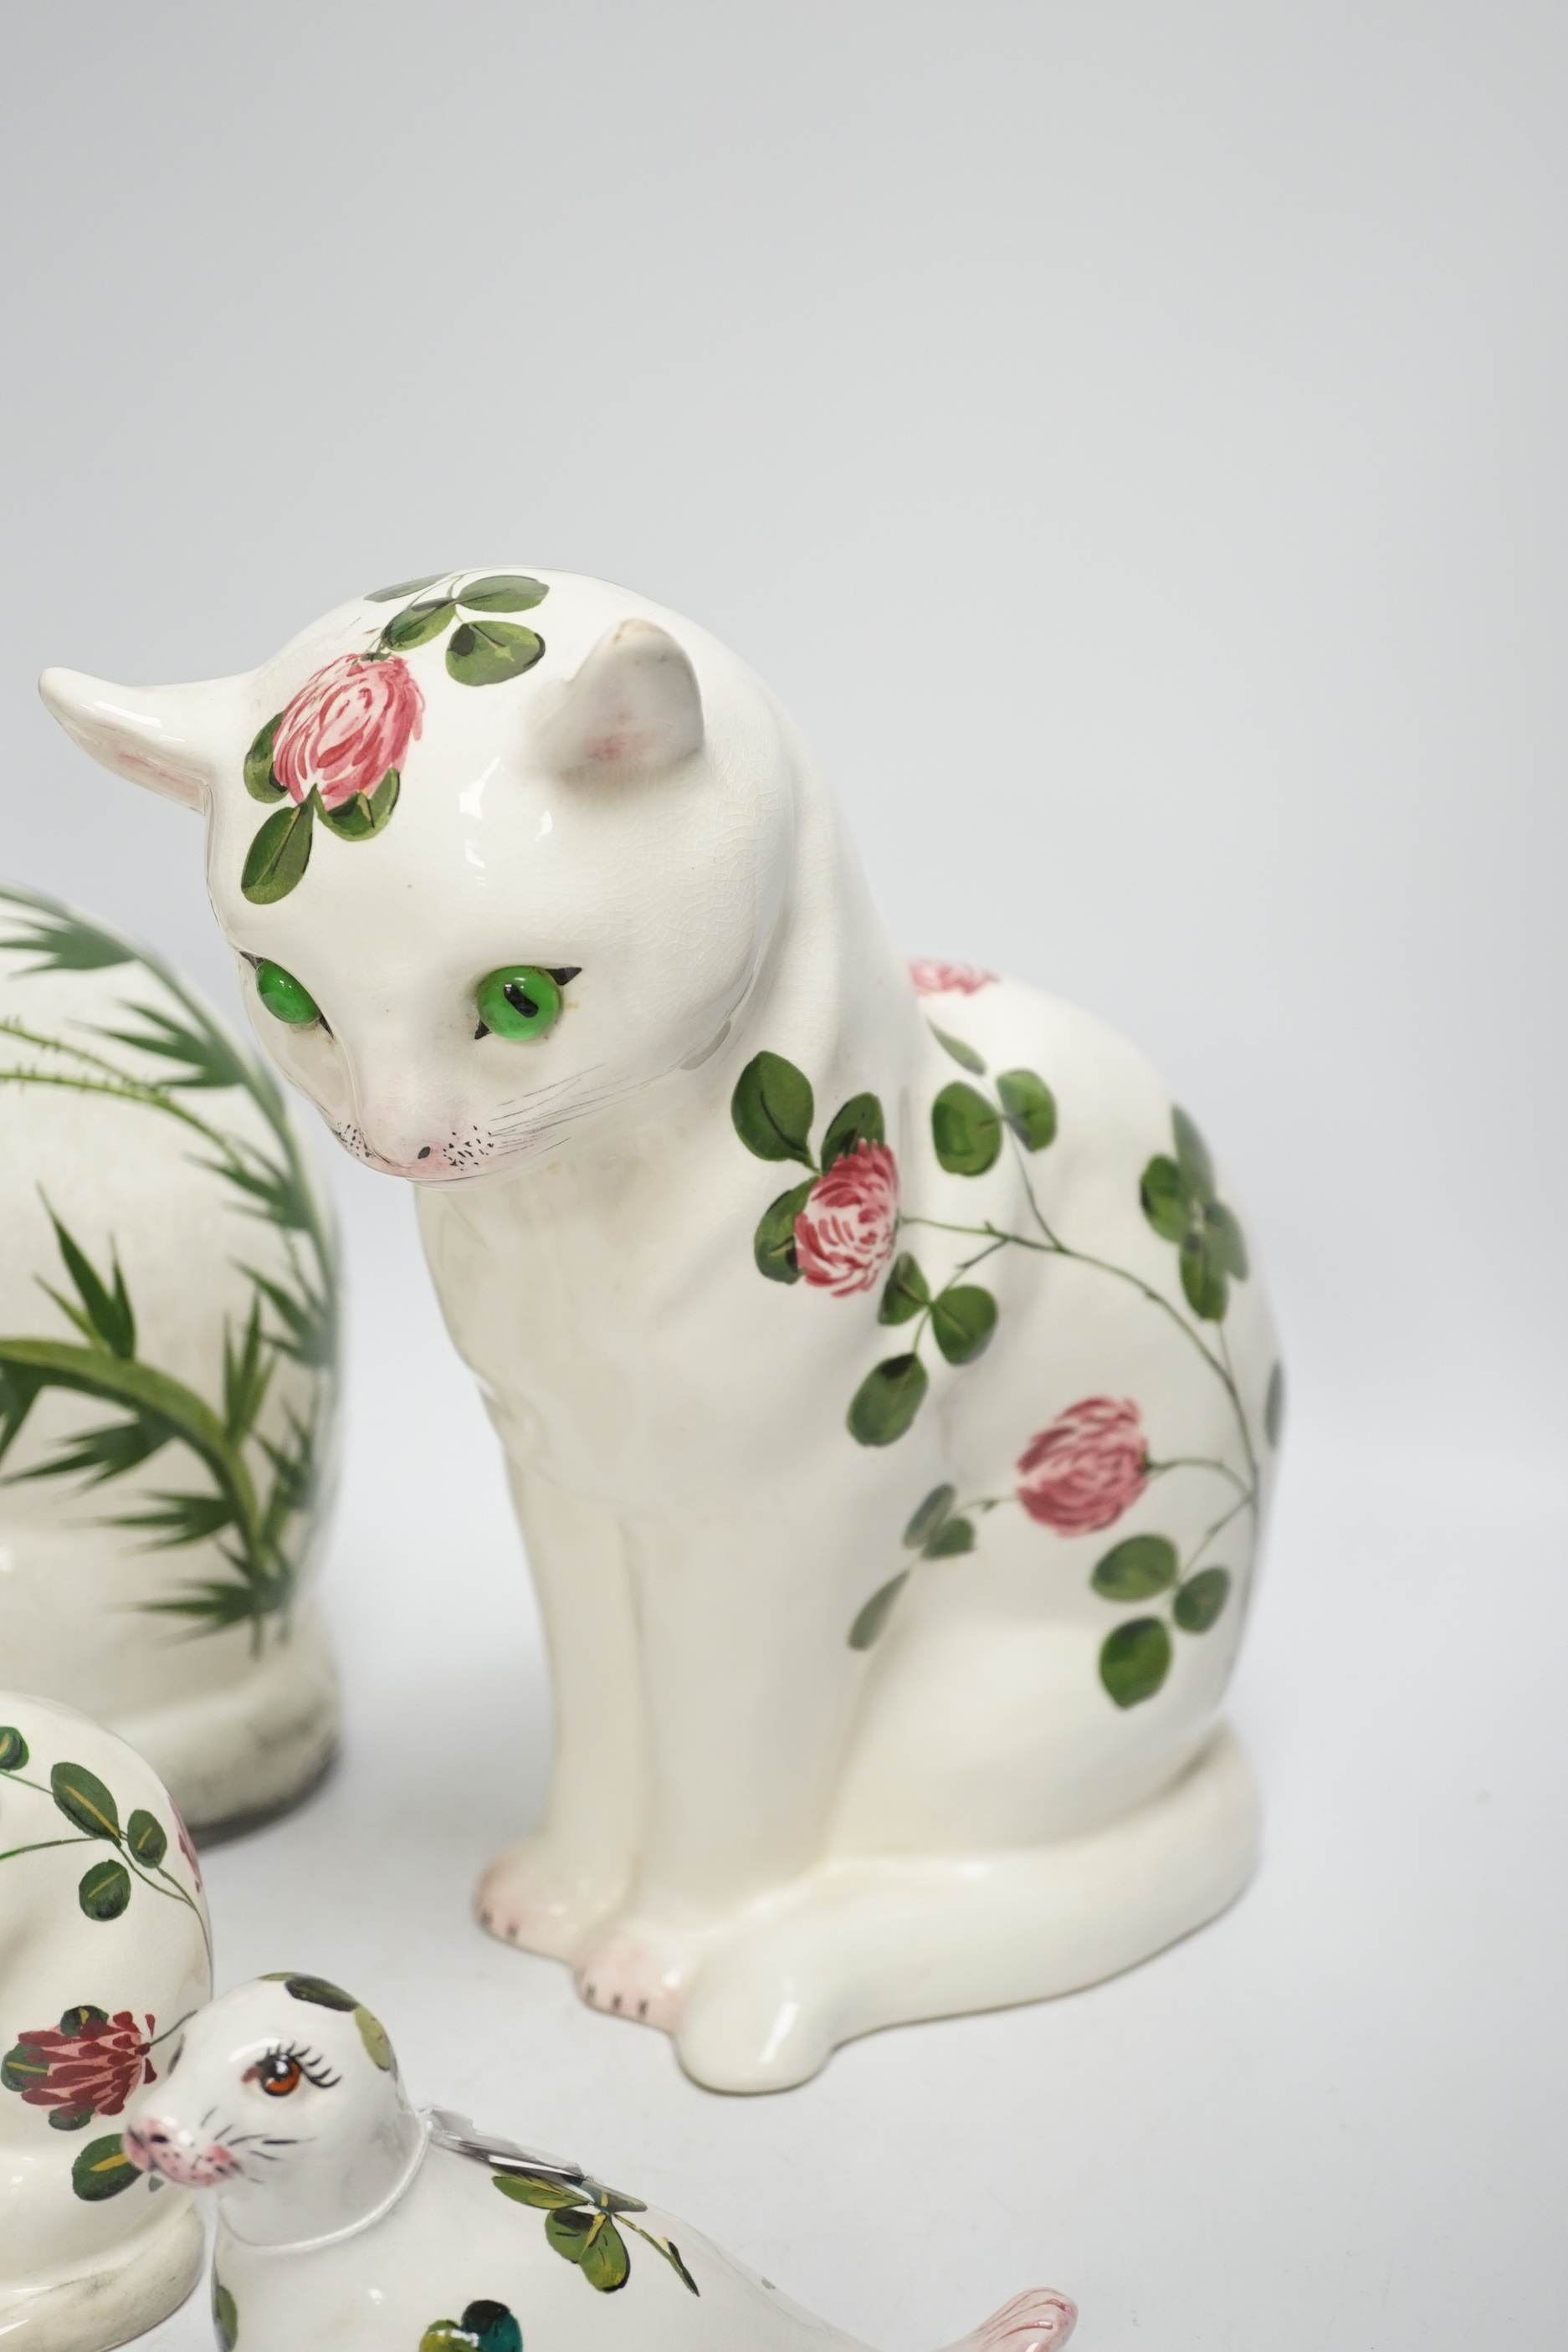 A Plichta clover pattern cat, a Plichta thistle pattern cat, together with two small Plichta cats and a seal, largest 26cm high